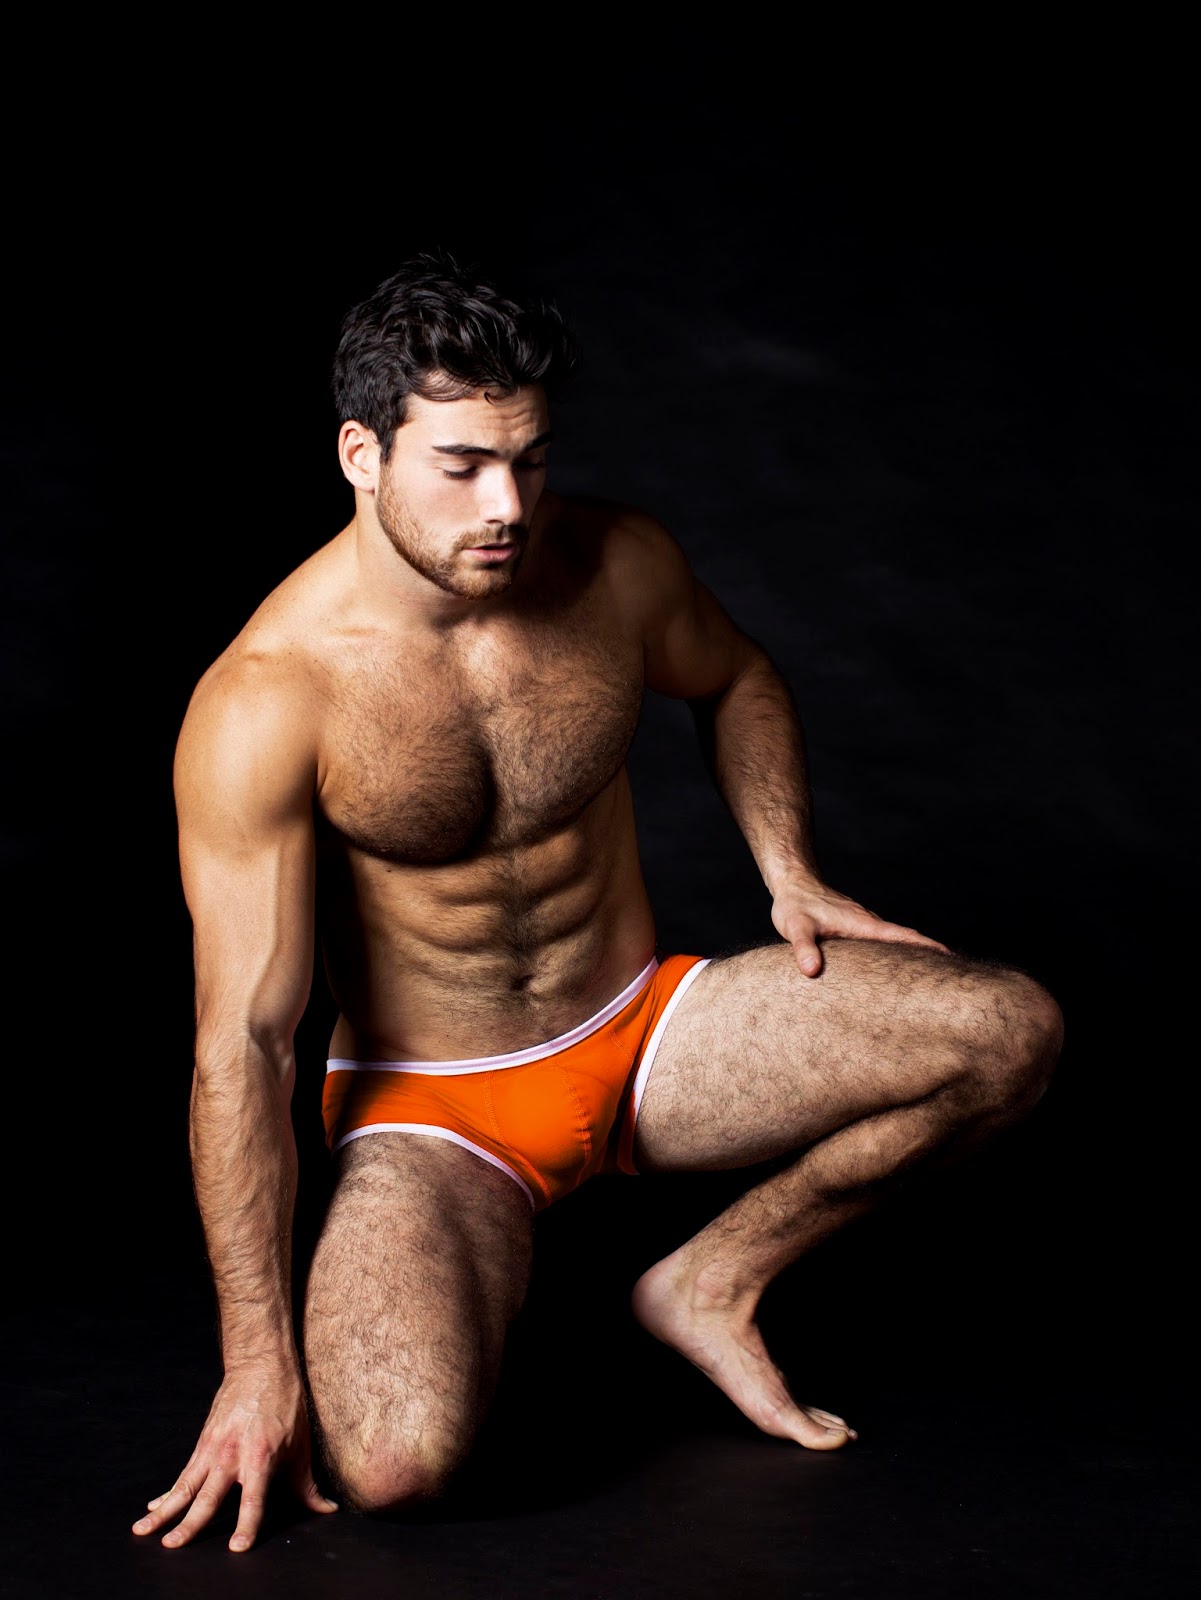 AussieBum releases Billy in new colours plus three new ranges of